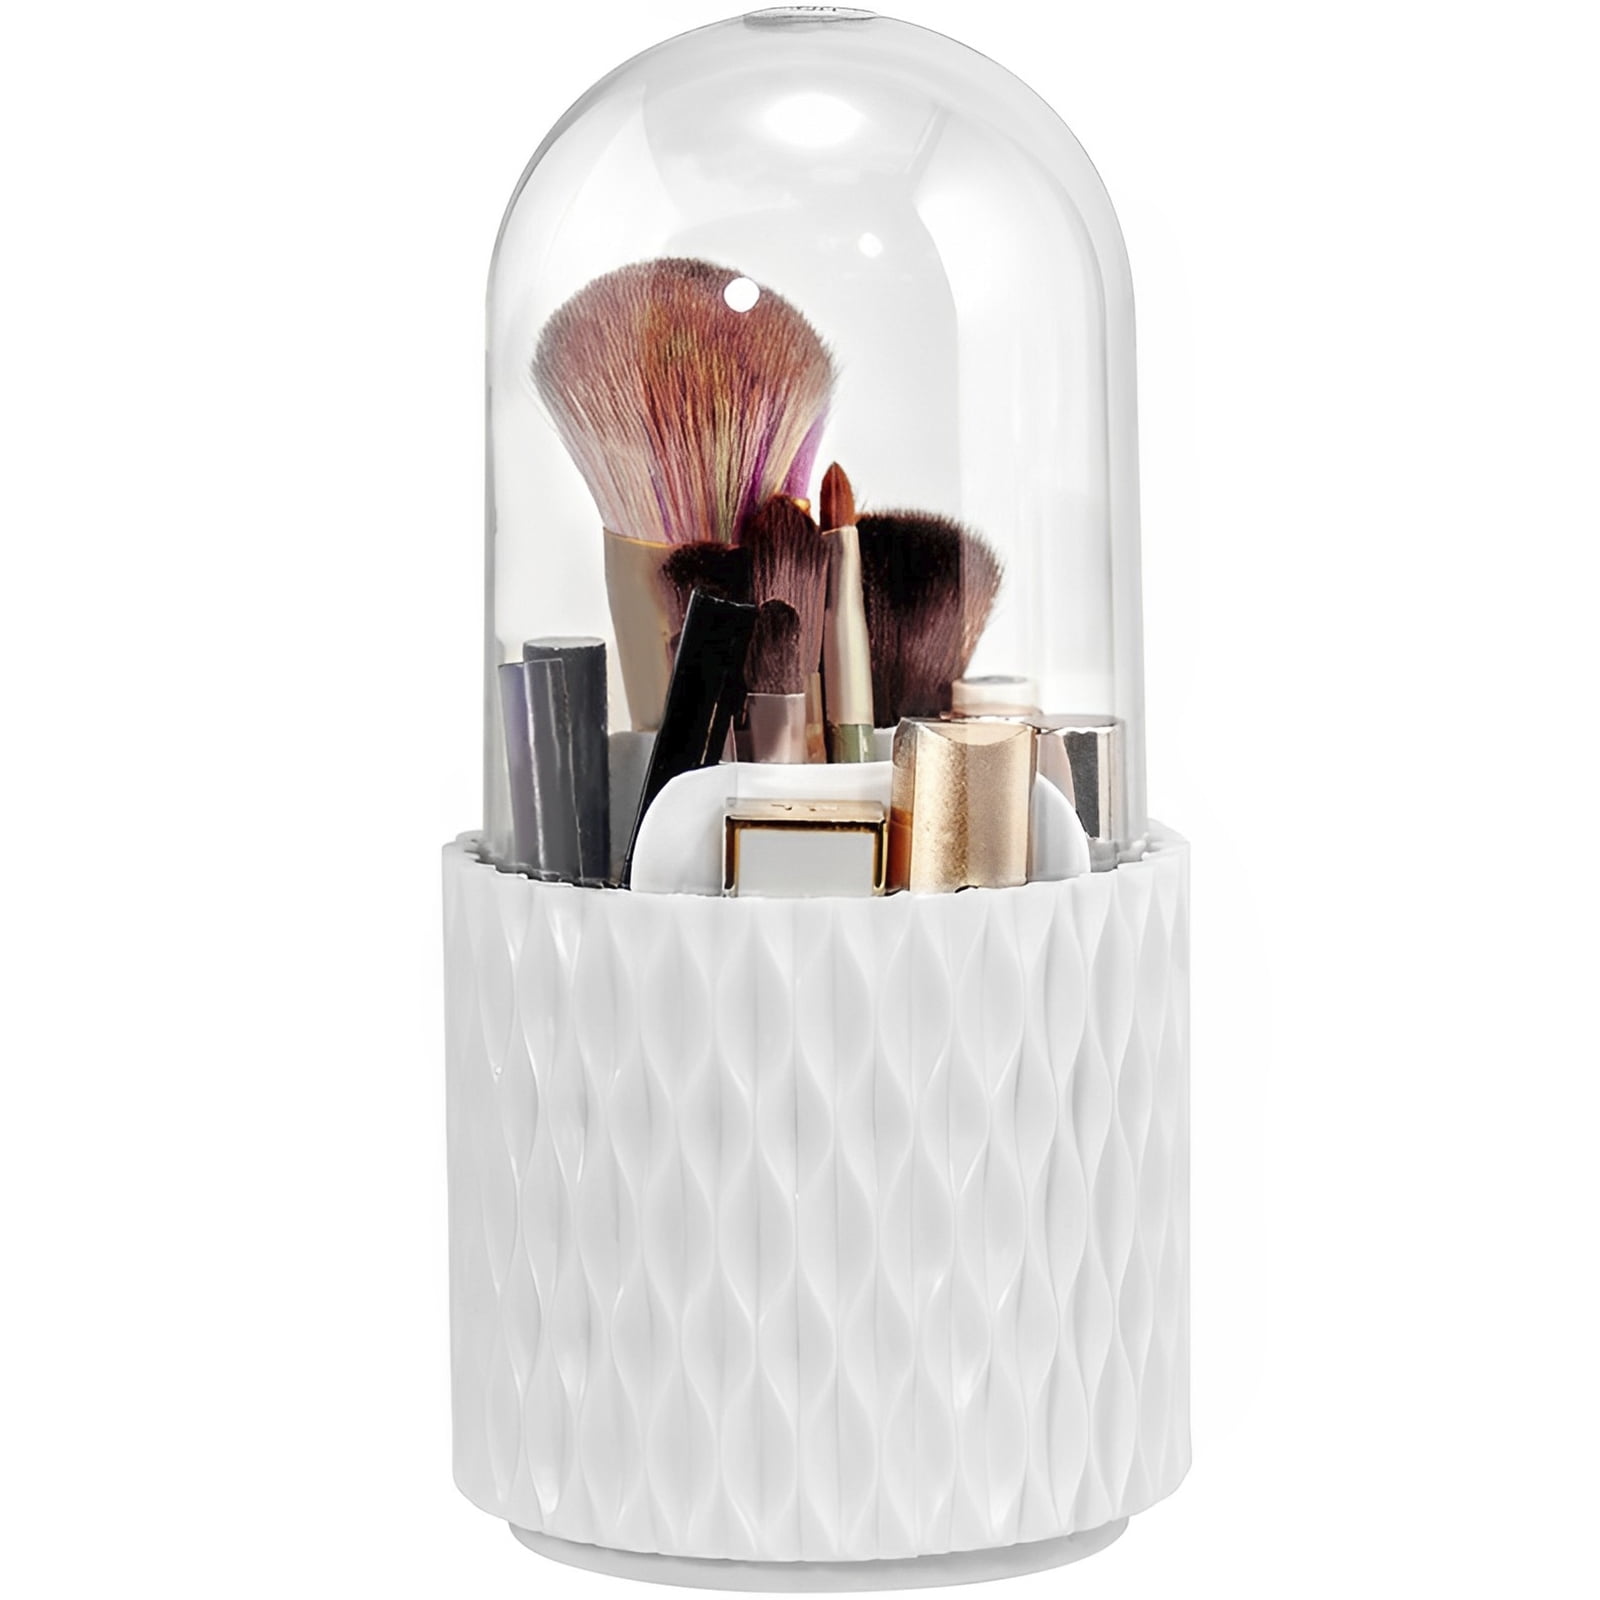 Ruibeauty Makeup Brush Holder Organizer Cup 360° Rotating For Cosmetics  Painting Pen 